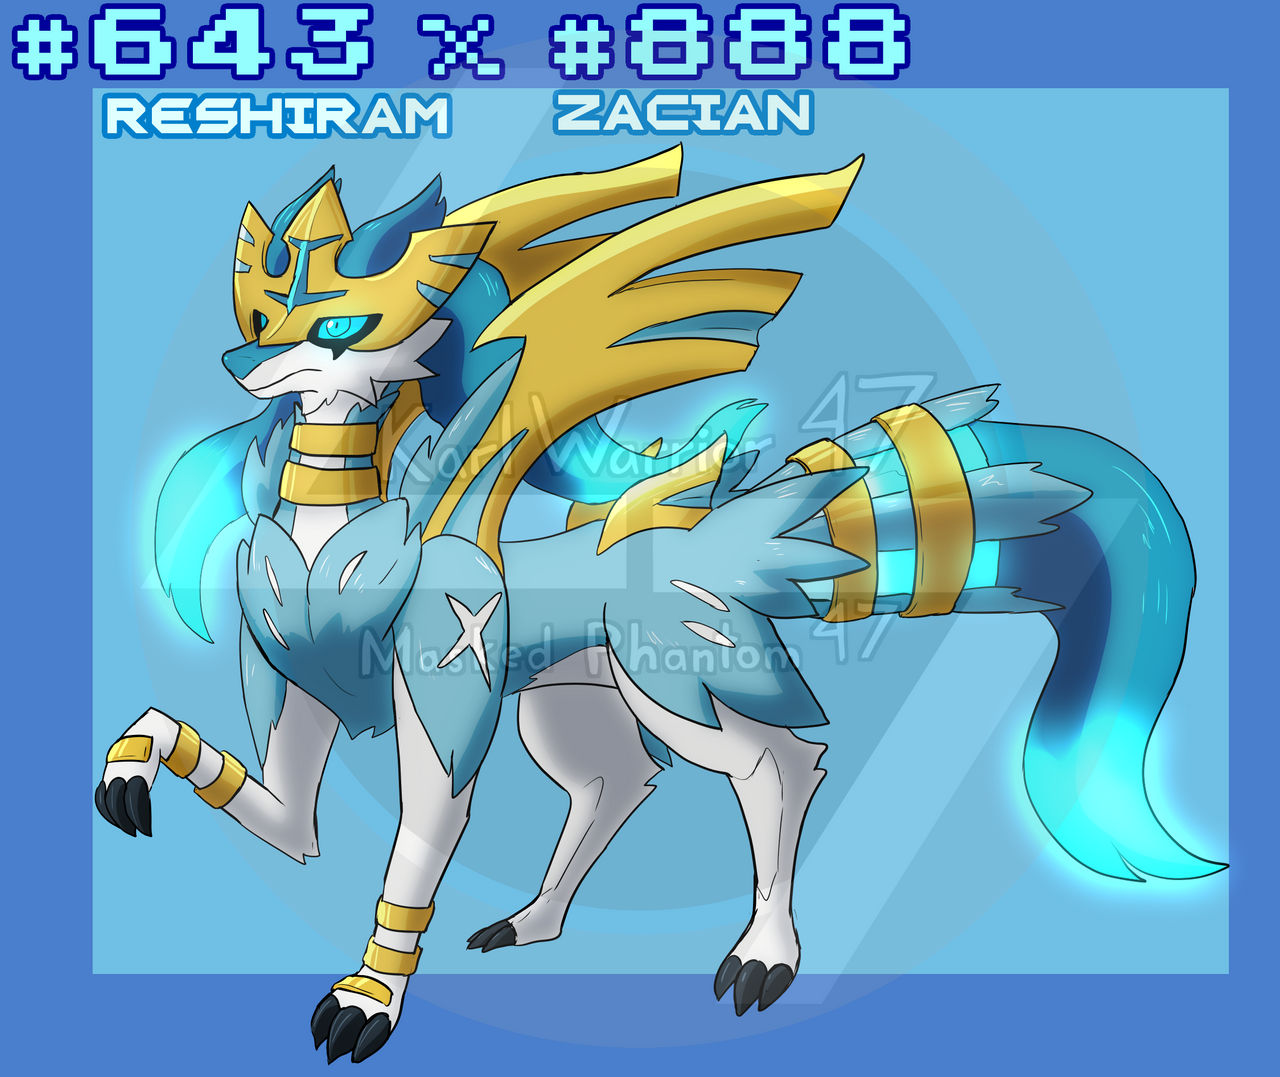 Luxkrom (Luxray-Zekrom fusion) by jordanqv.deviantart.com on